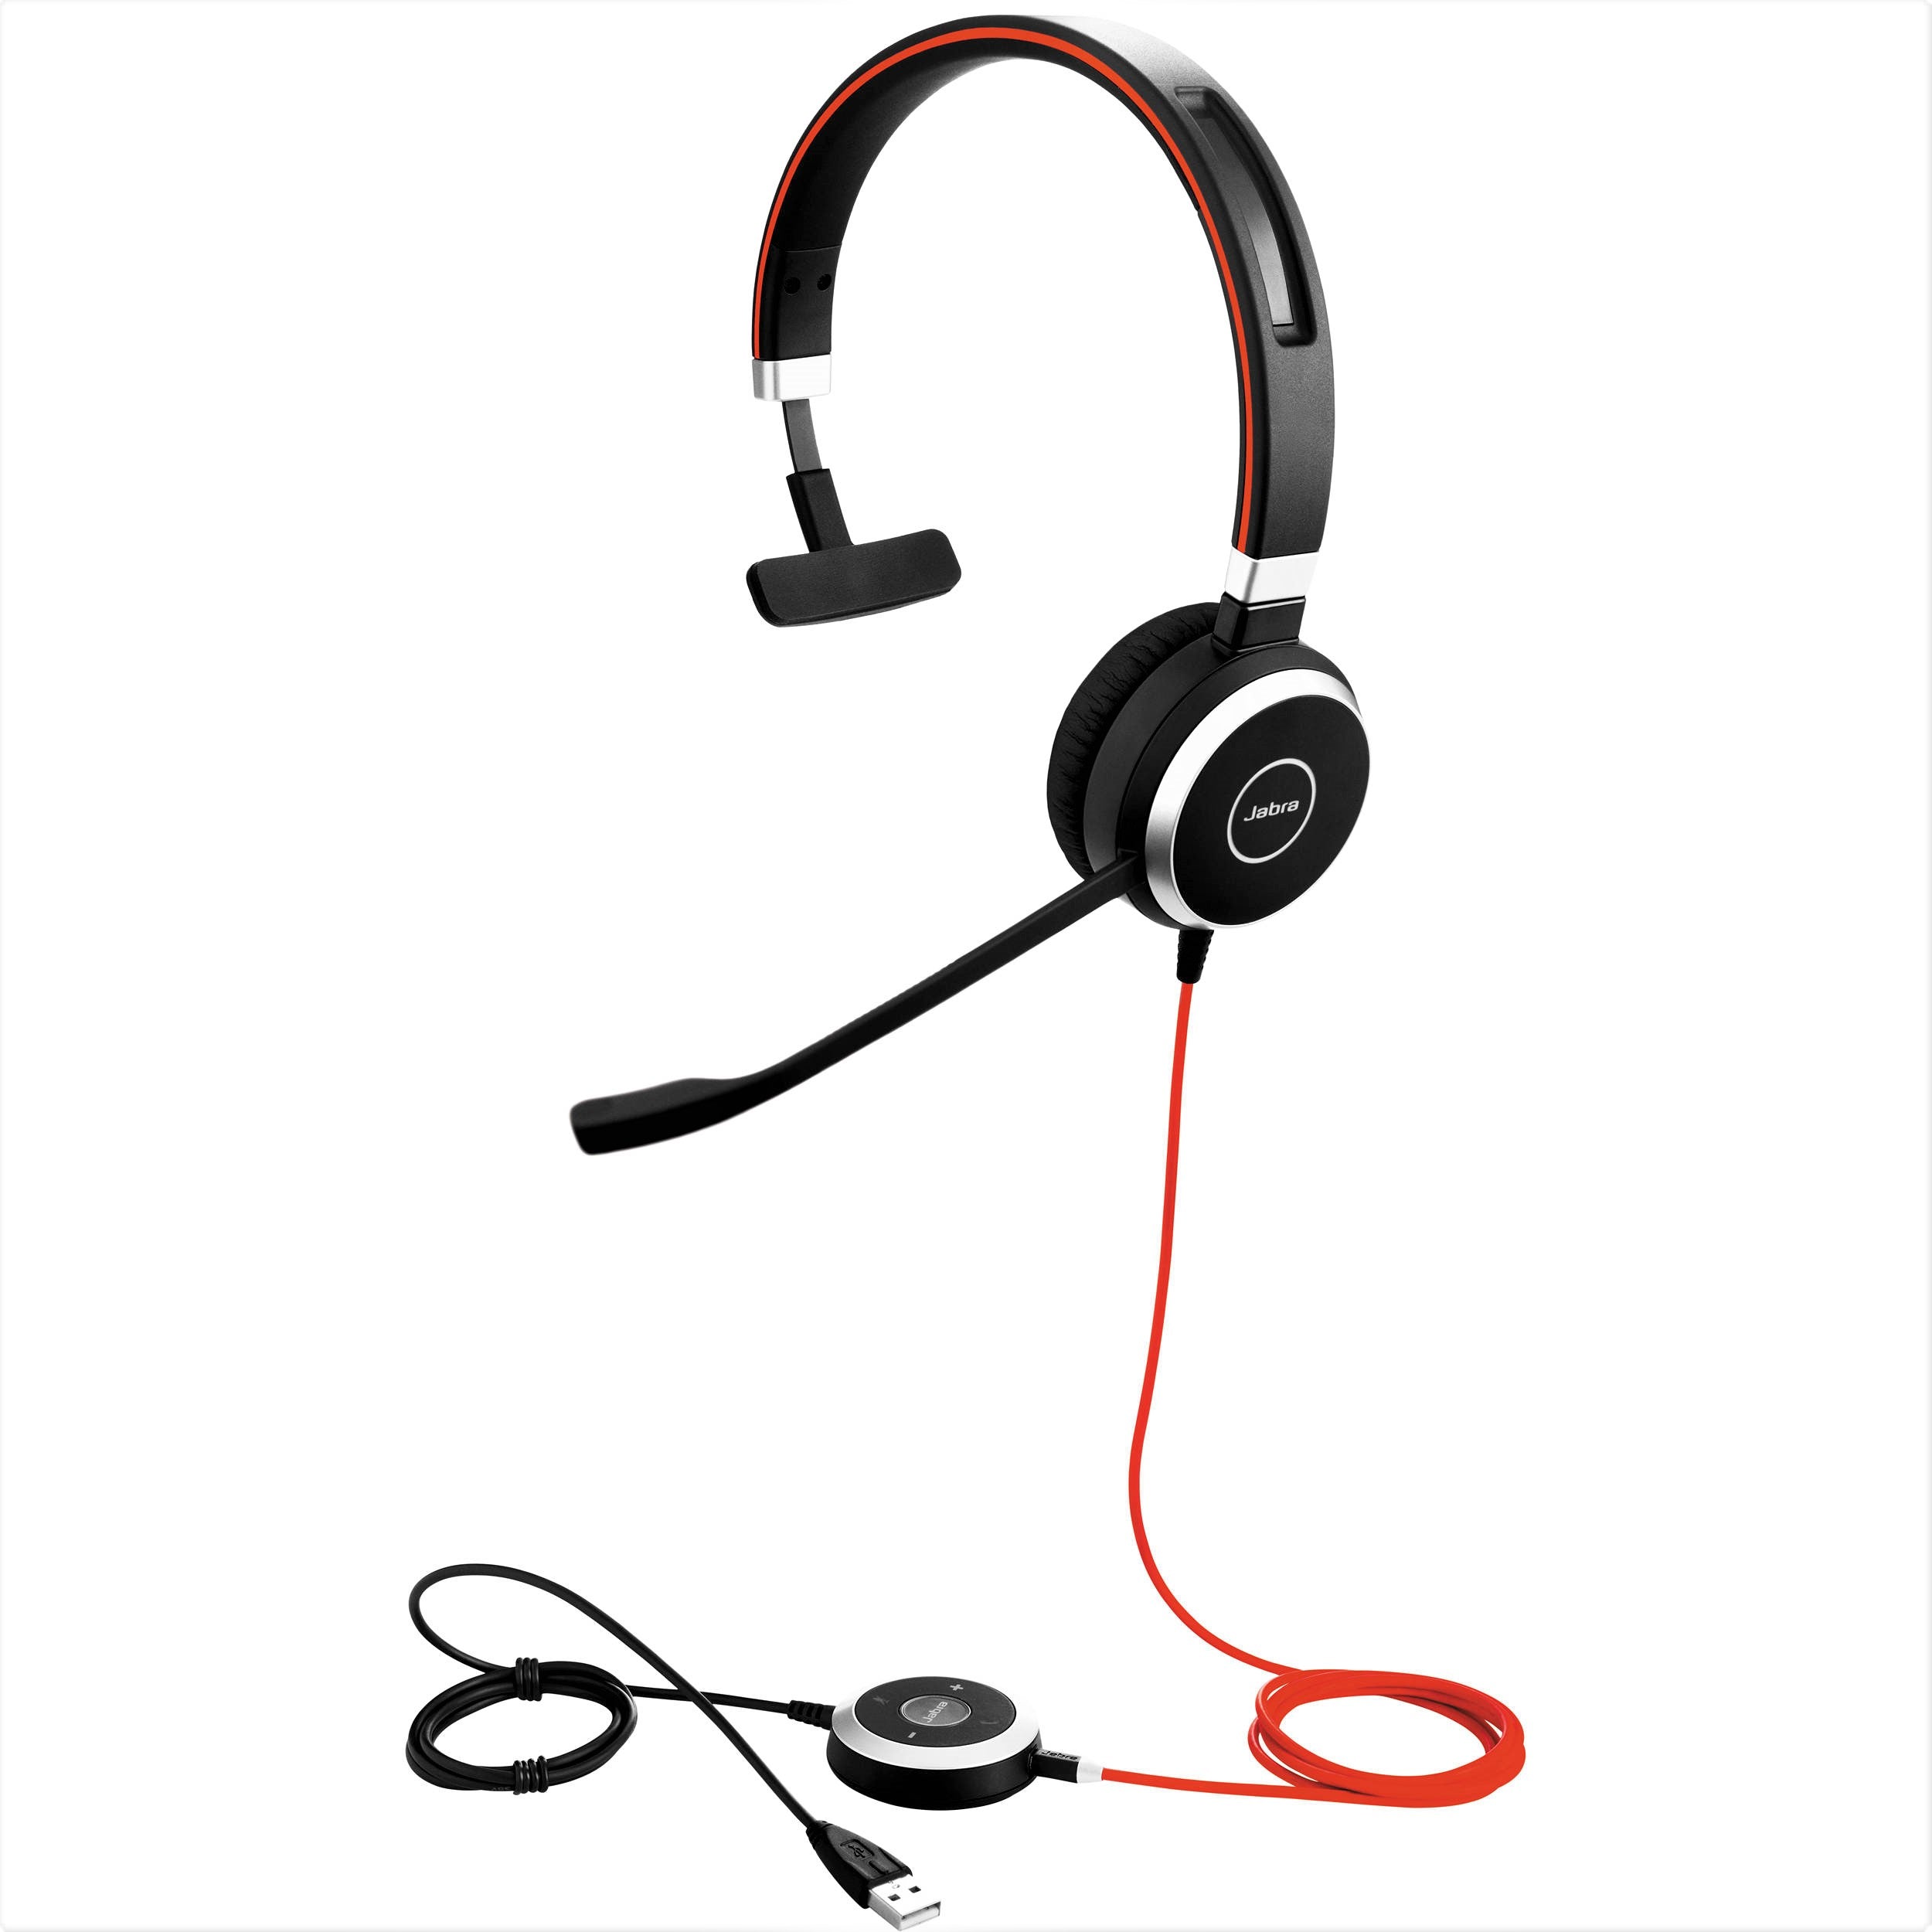  Jabra Evolve 40 MS Professional Wired Headset, Mono – Telephone  Headset for Greater Productivity, Superior Sound for Calls and Music, 3.5mm  Jack/USB Connection, All-Day Comfort Design, MS Optimized : Electronics